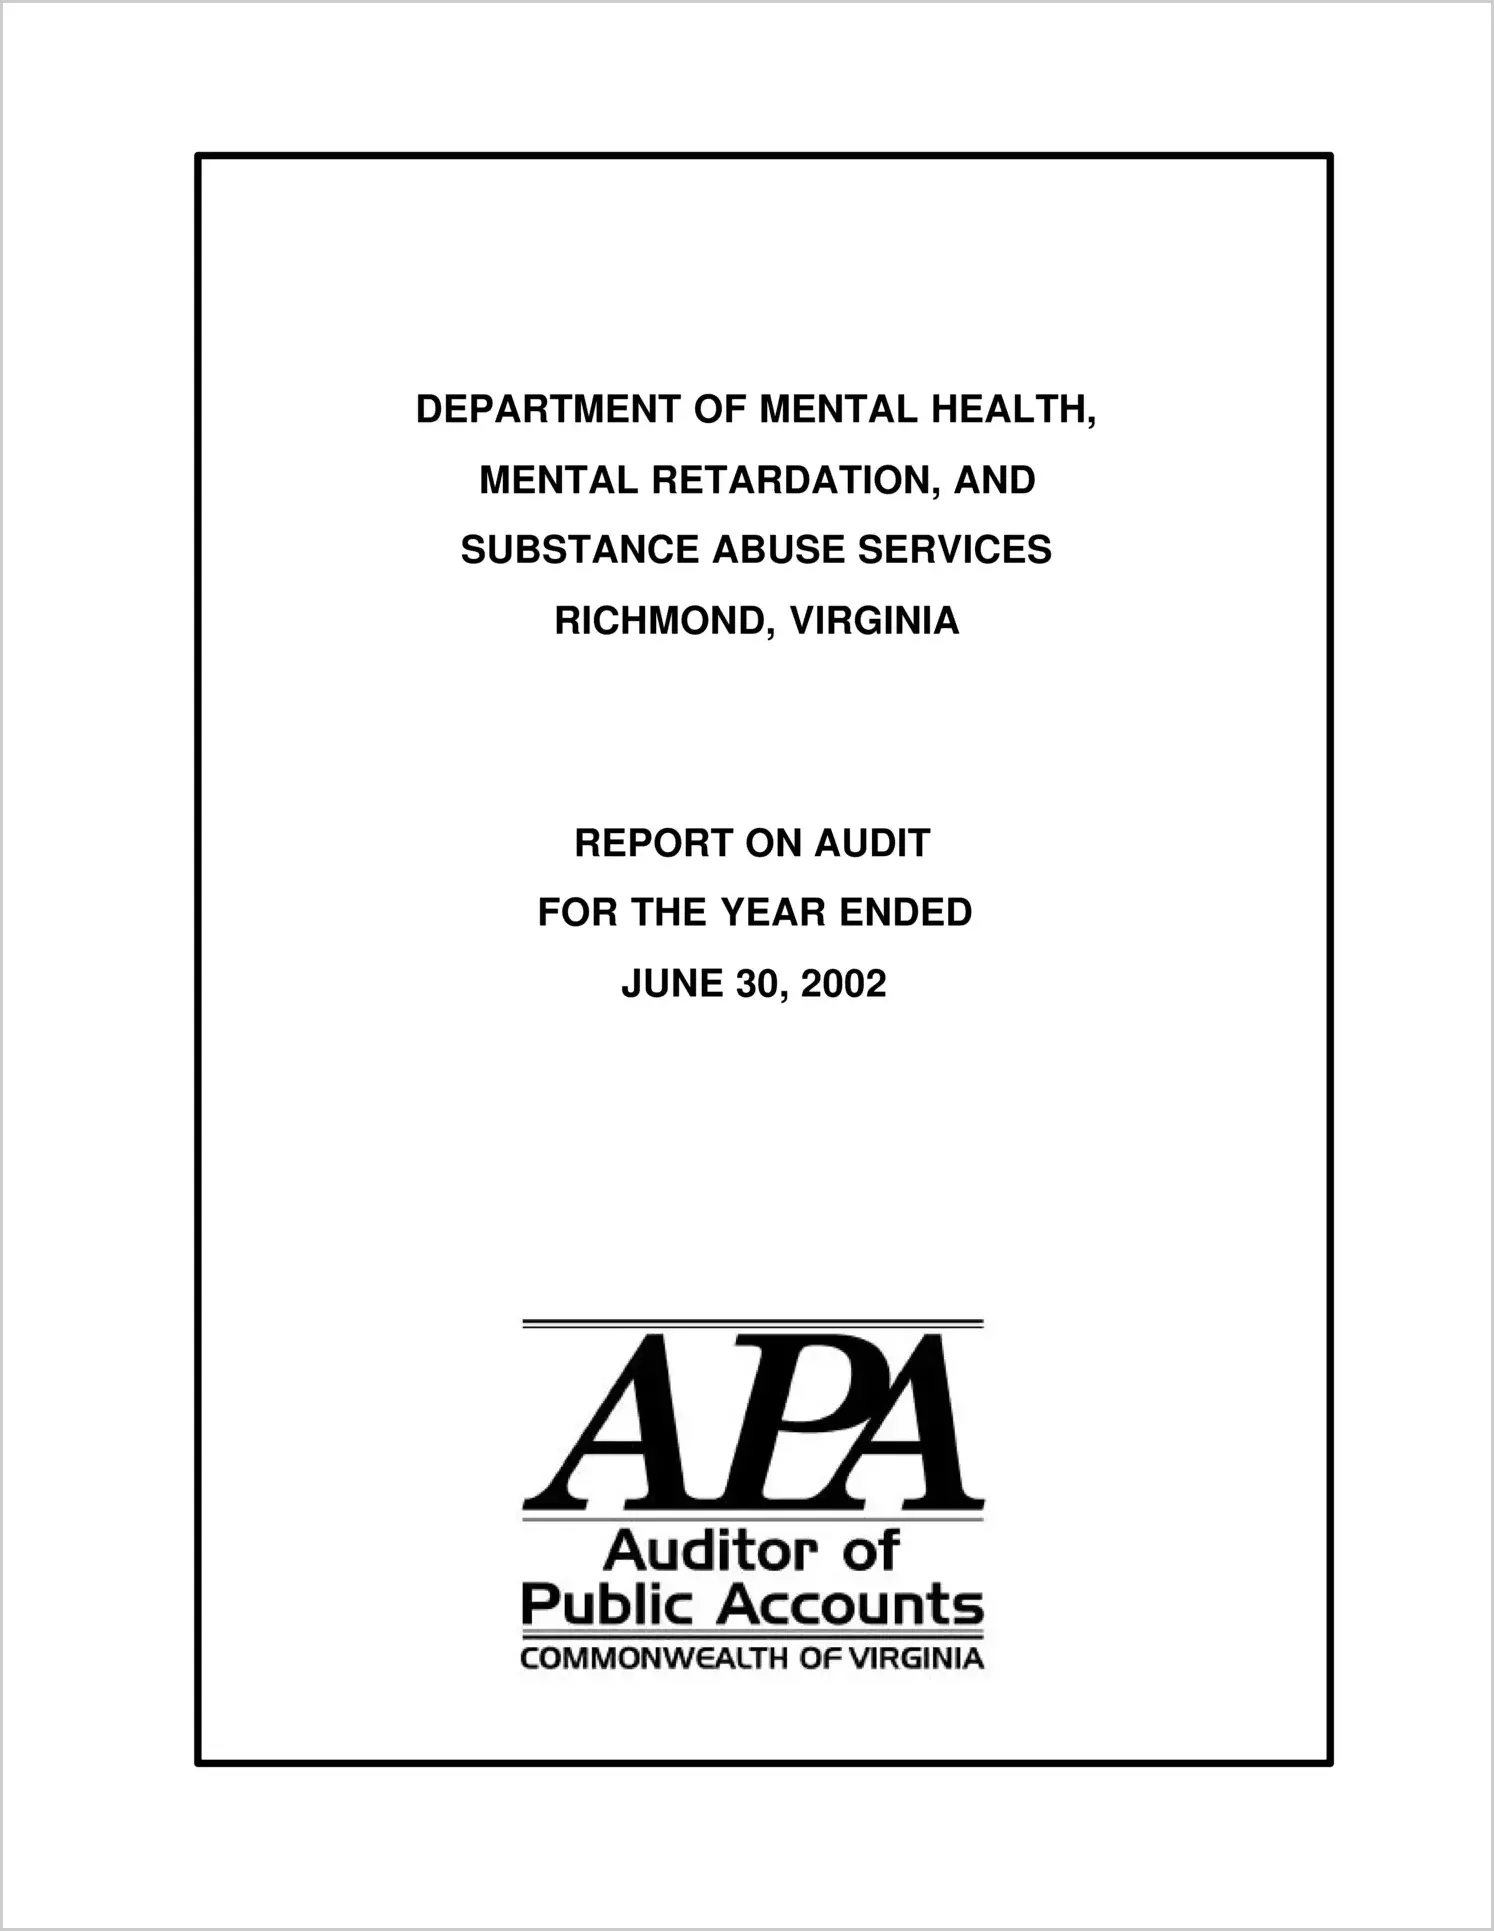 Department of Mental Health, Mental Retardation, and Substance Abuse Services for the year ended June 30, 2002